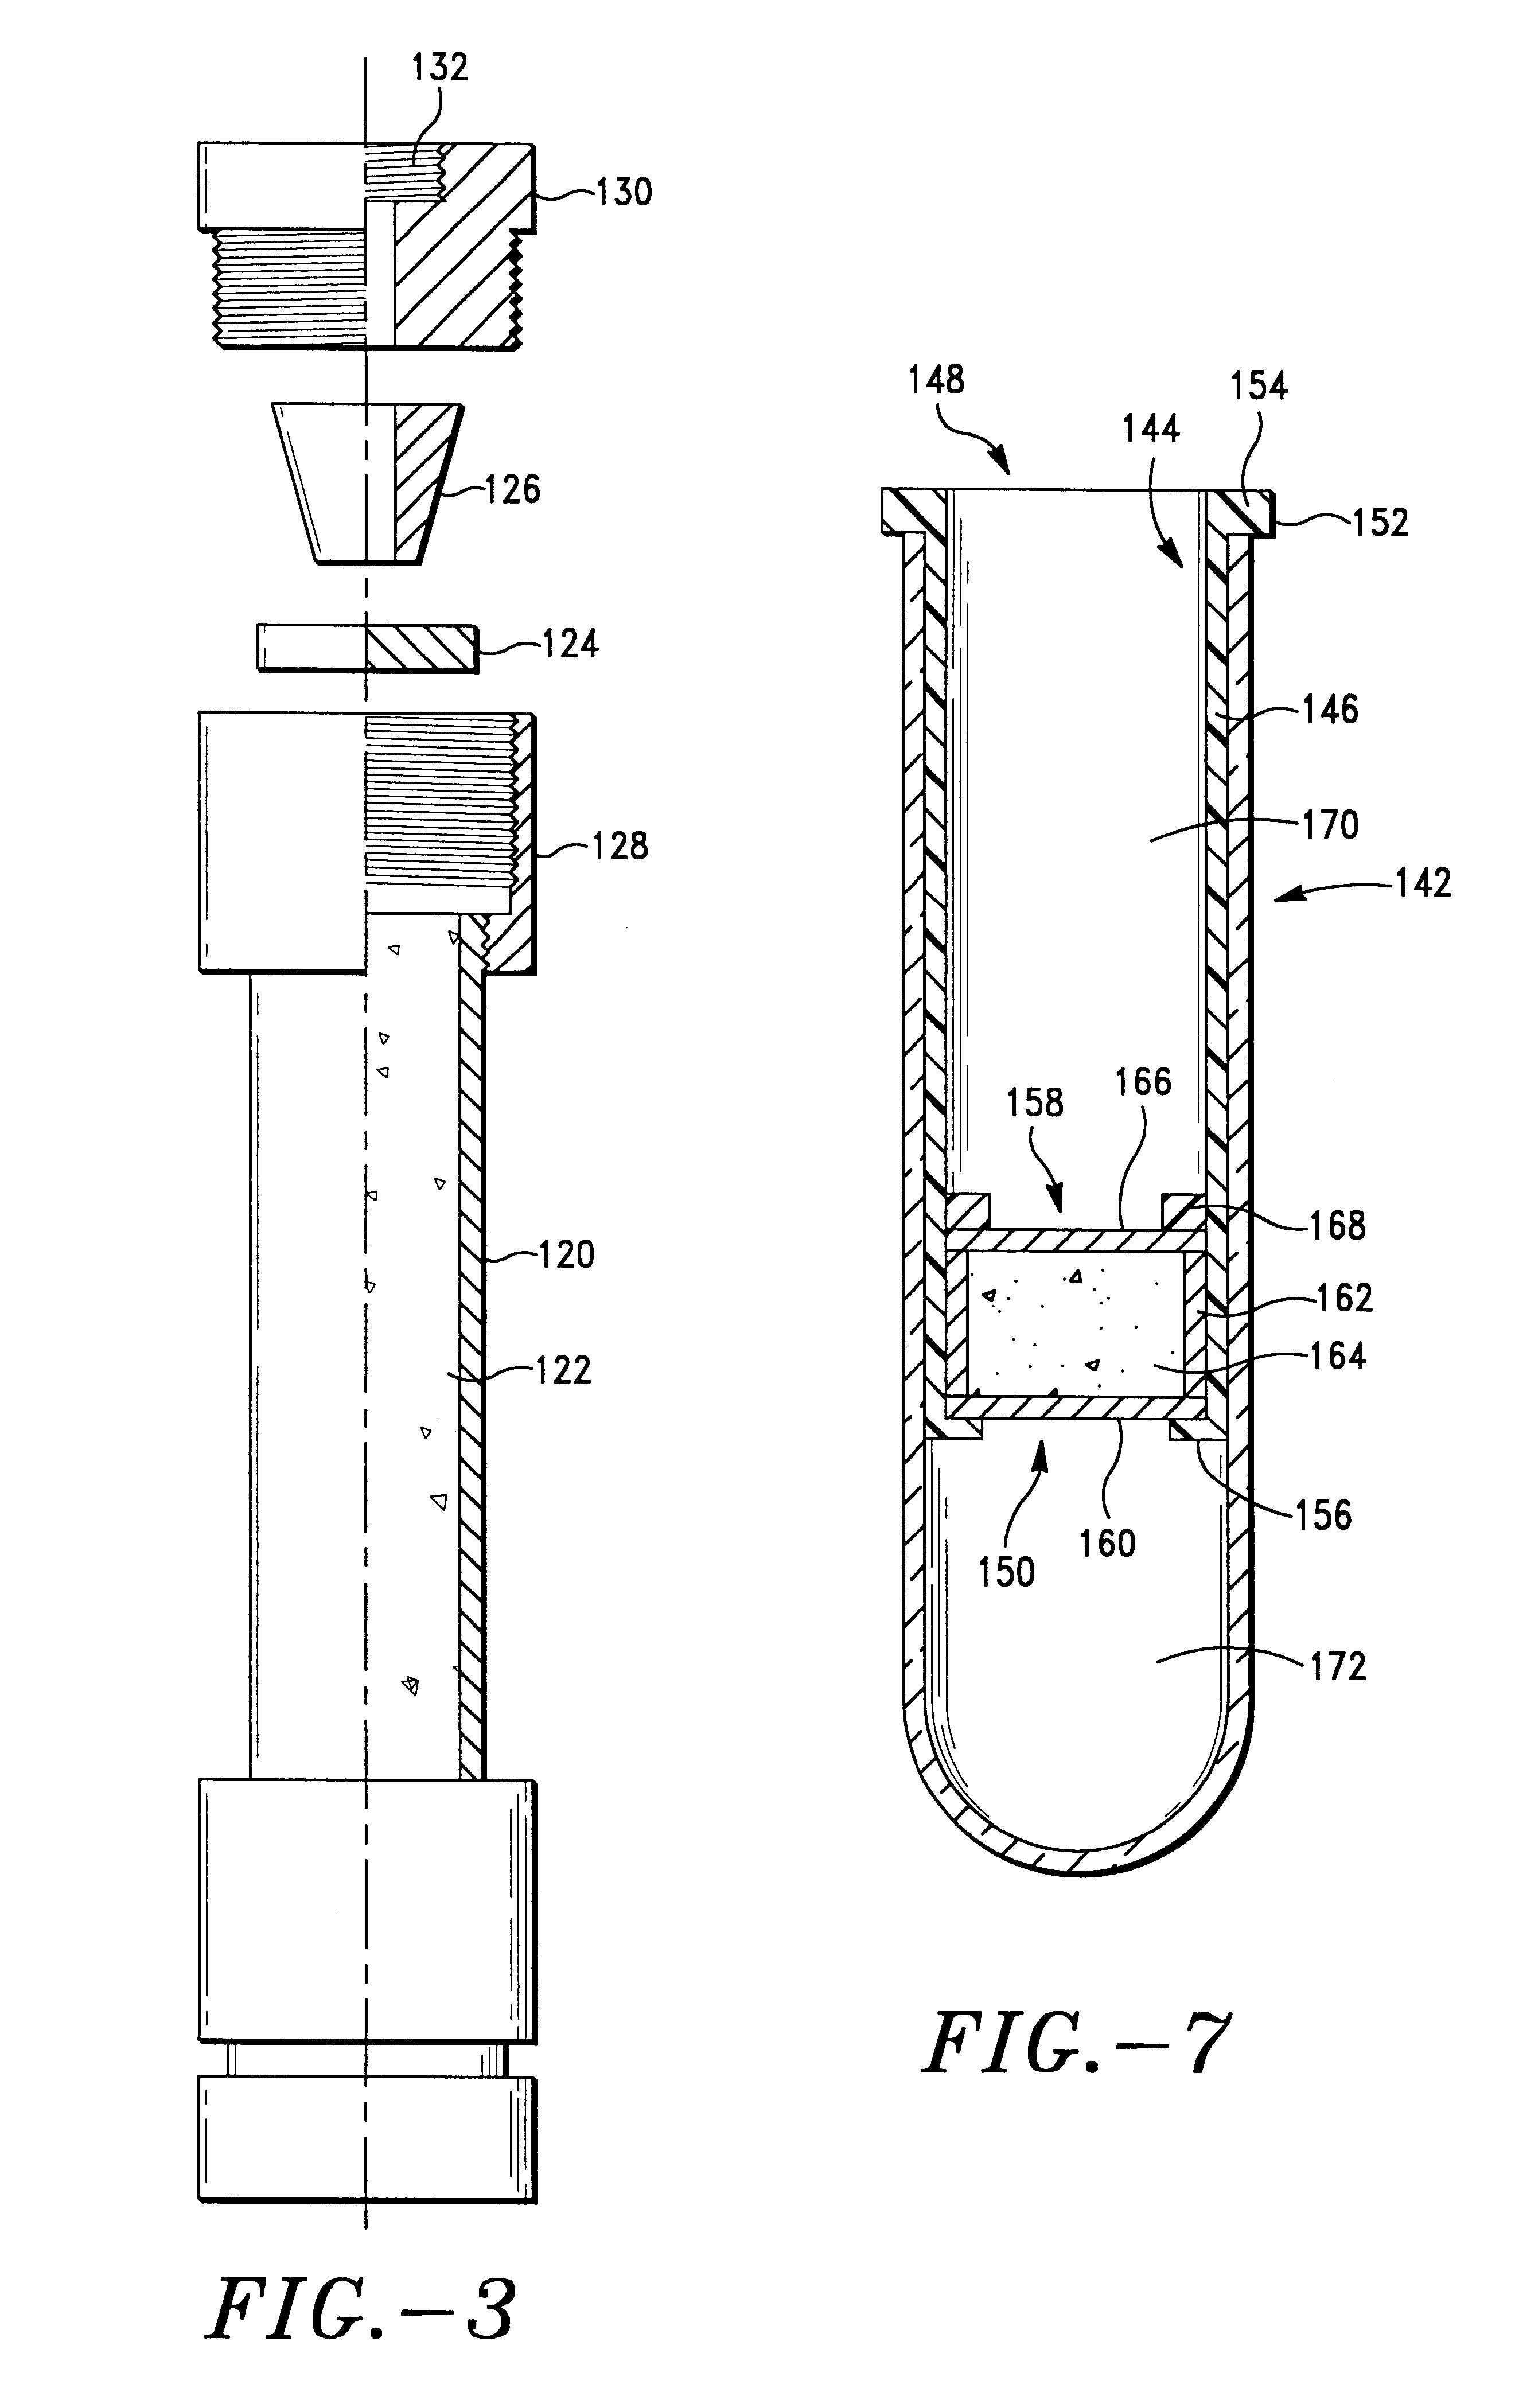 Apparatus and method for separating and purifying polynucleotides